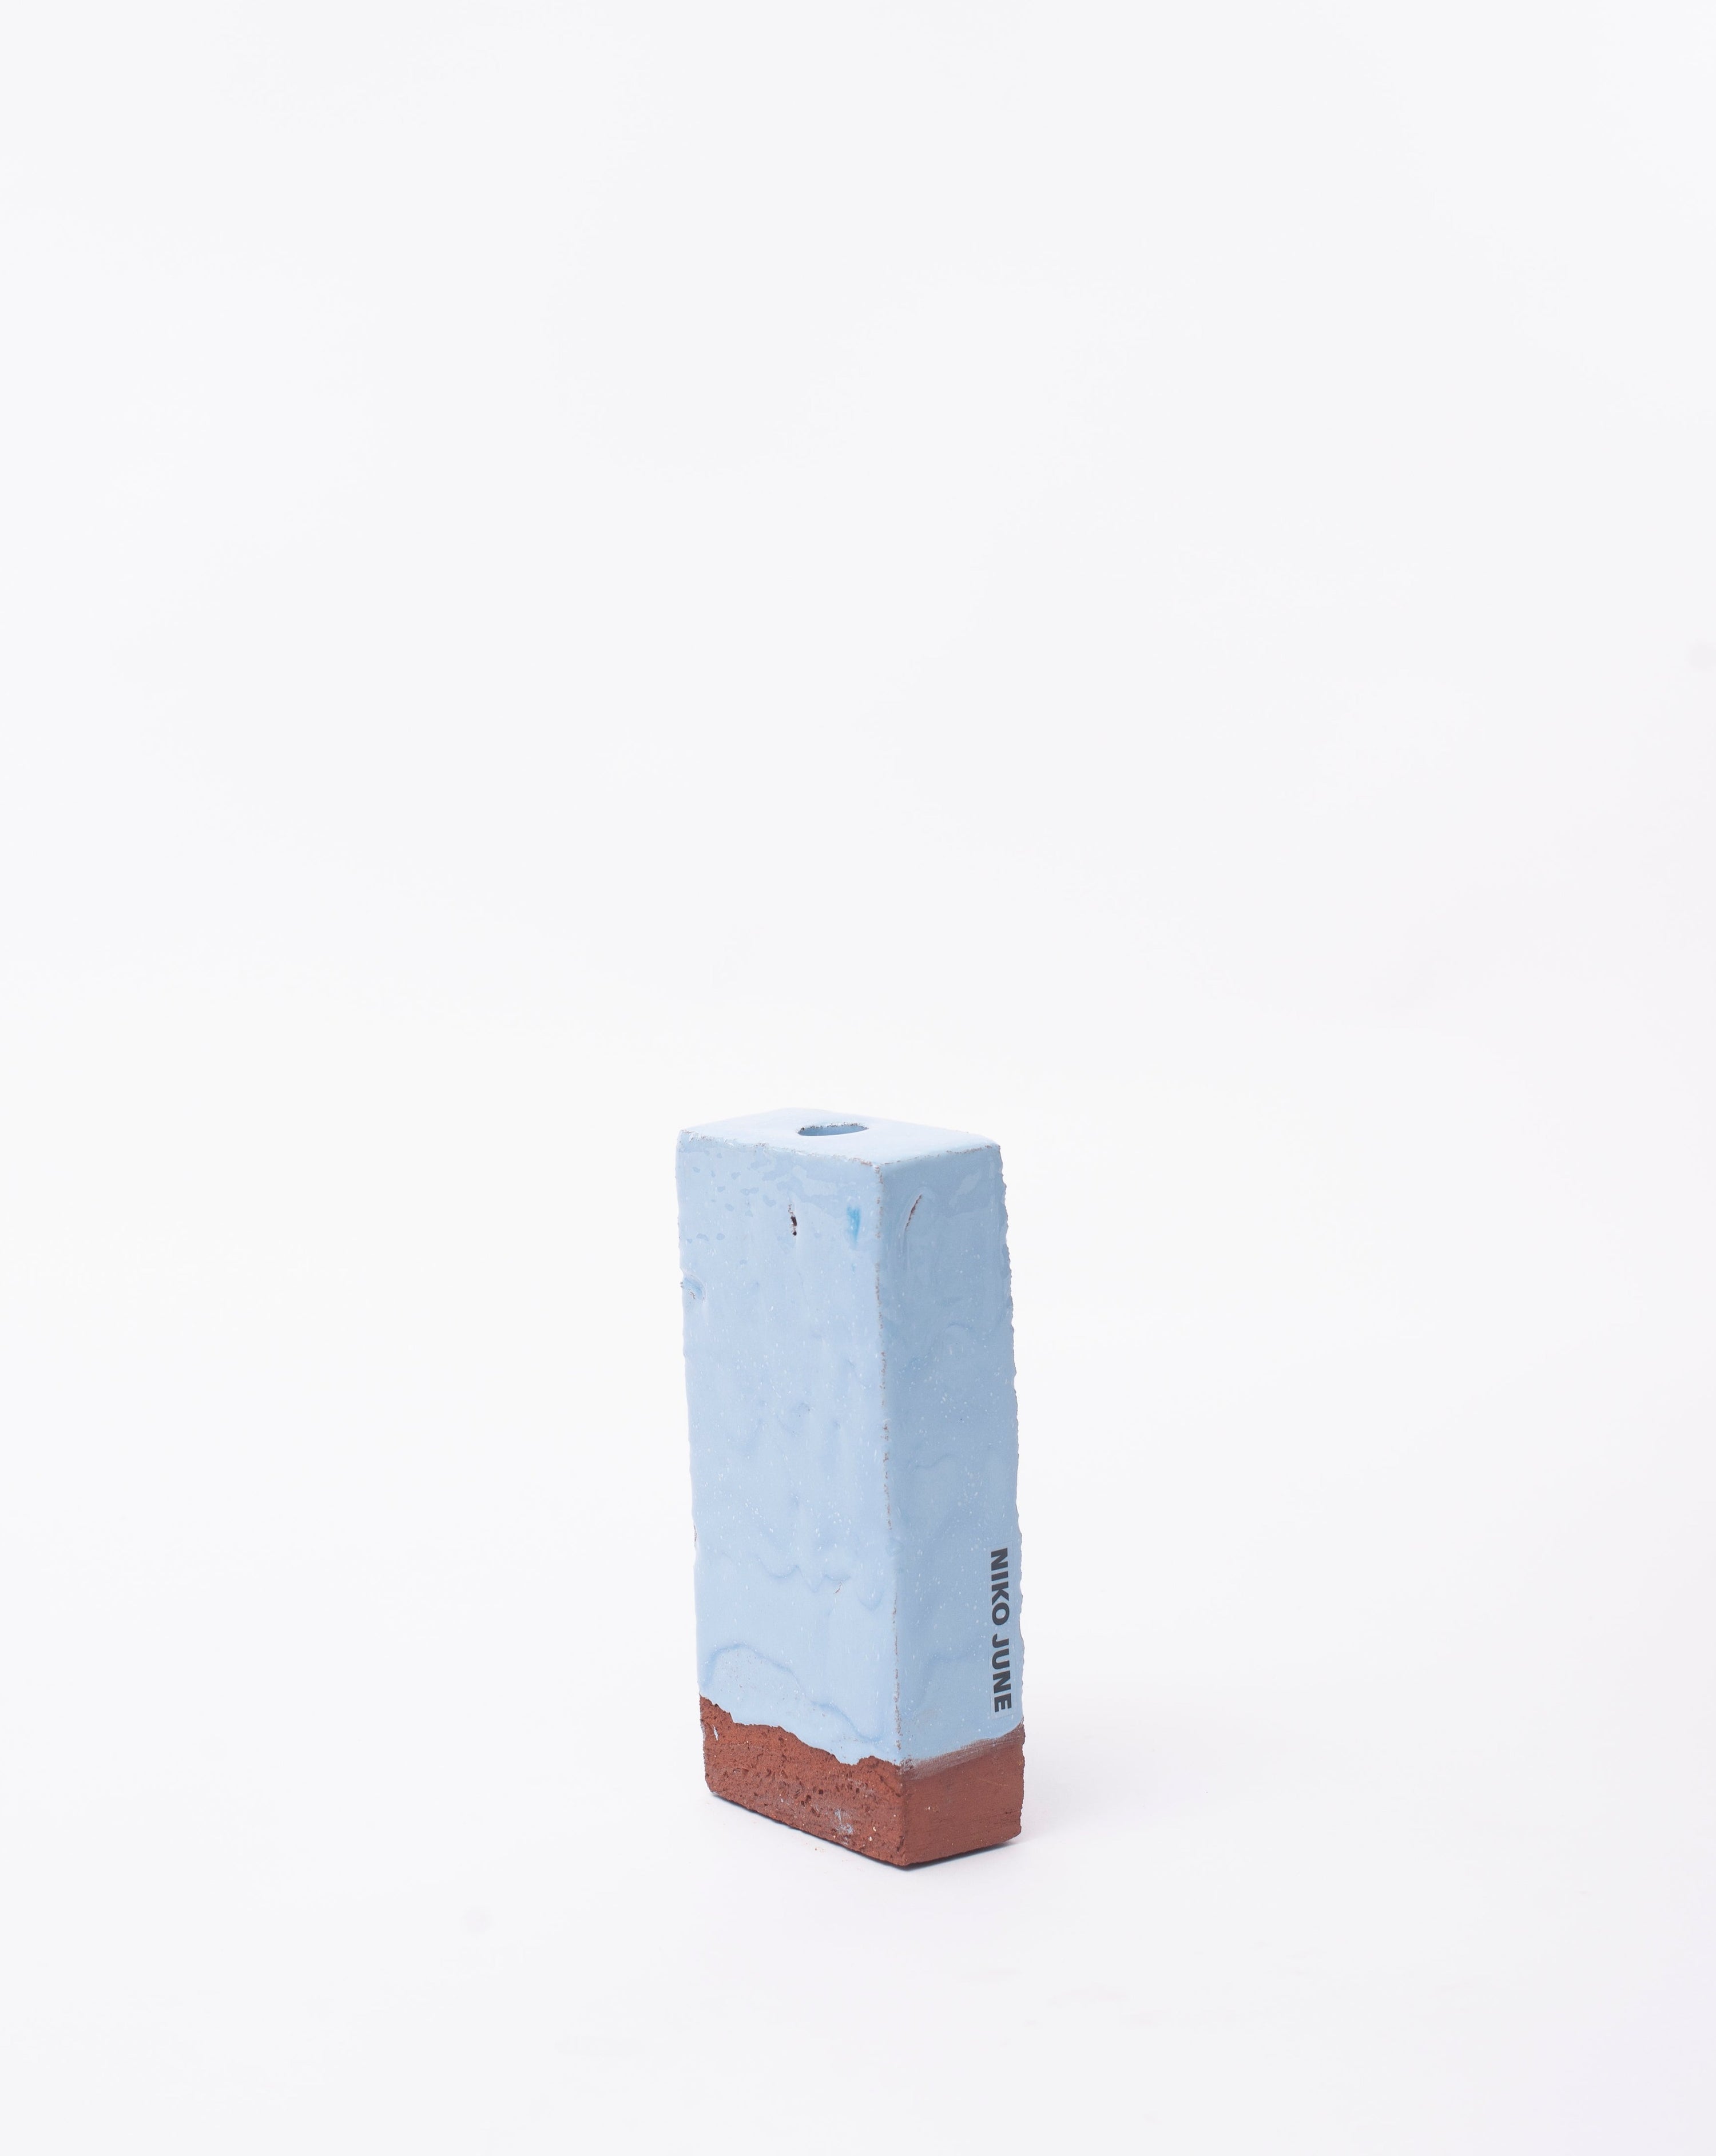 Handmade light blue brick ceramic candle holder in white background with right side view